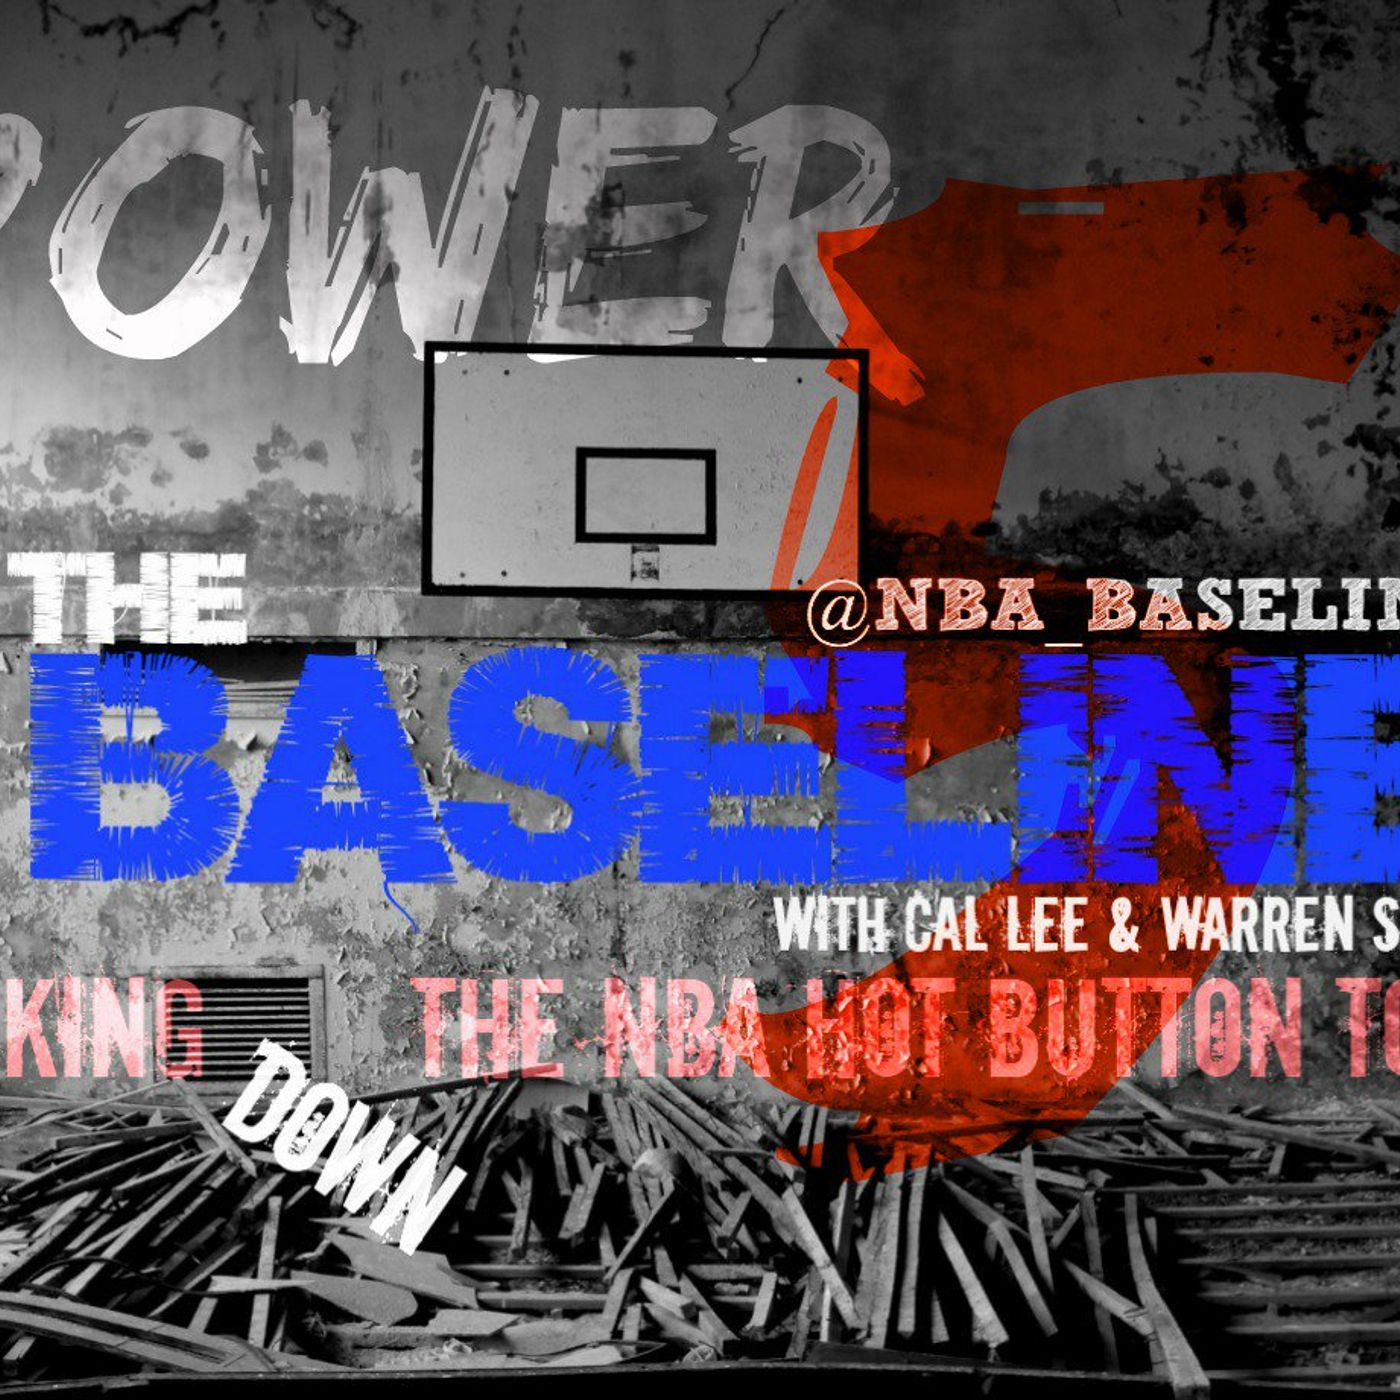 The Power 5 | Wade Season Fades | Suns Lakers Shut Players Down | Are Cavs #1 Again? Image